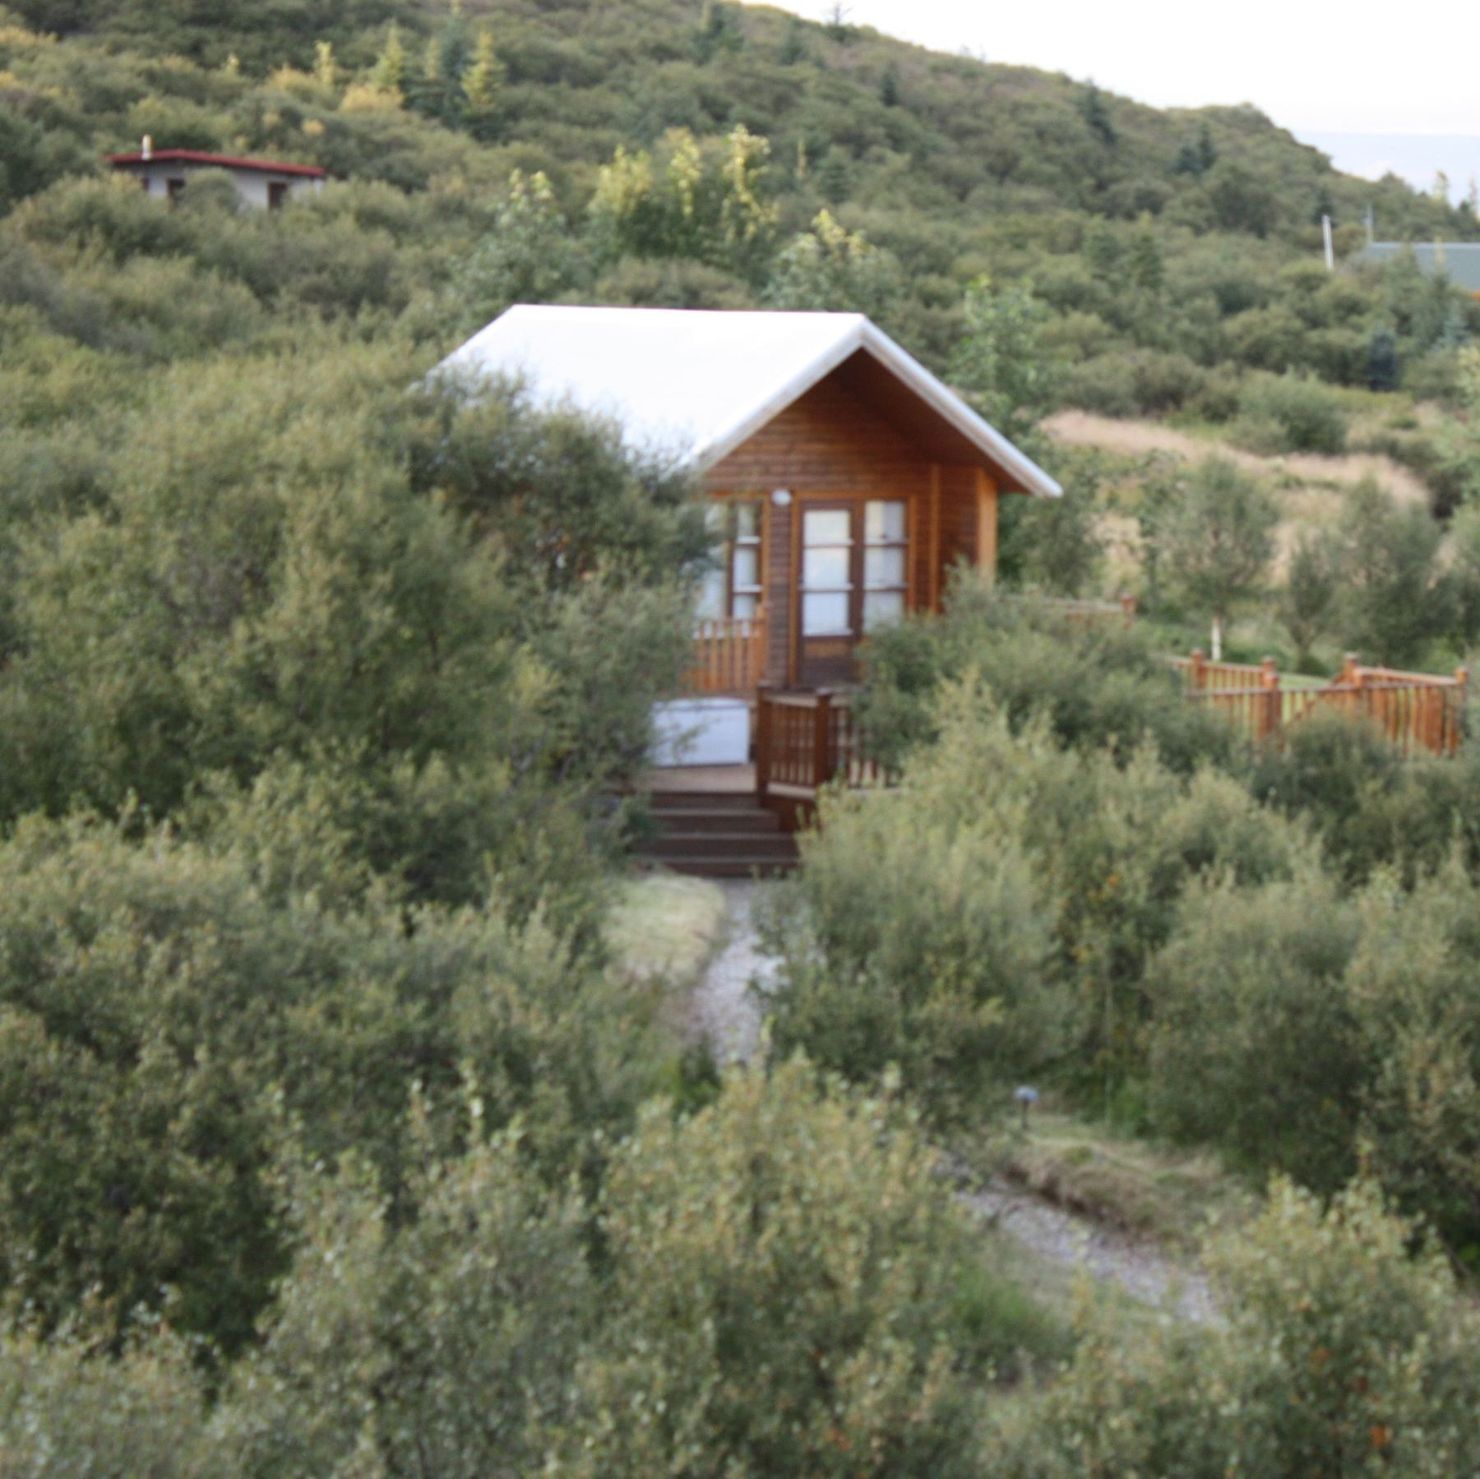 The holiday home is idyllically situated between birch trees and willow bushes